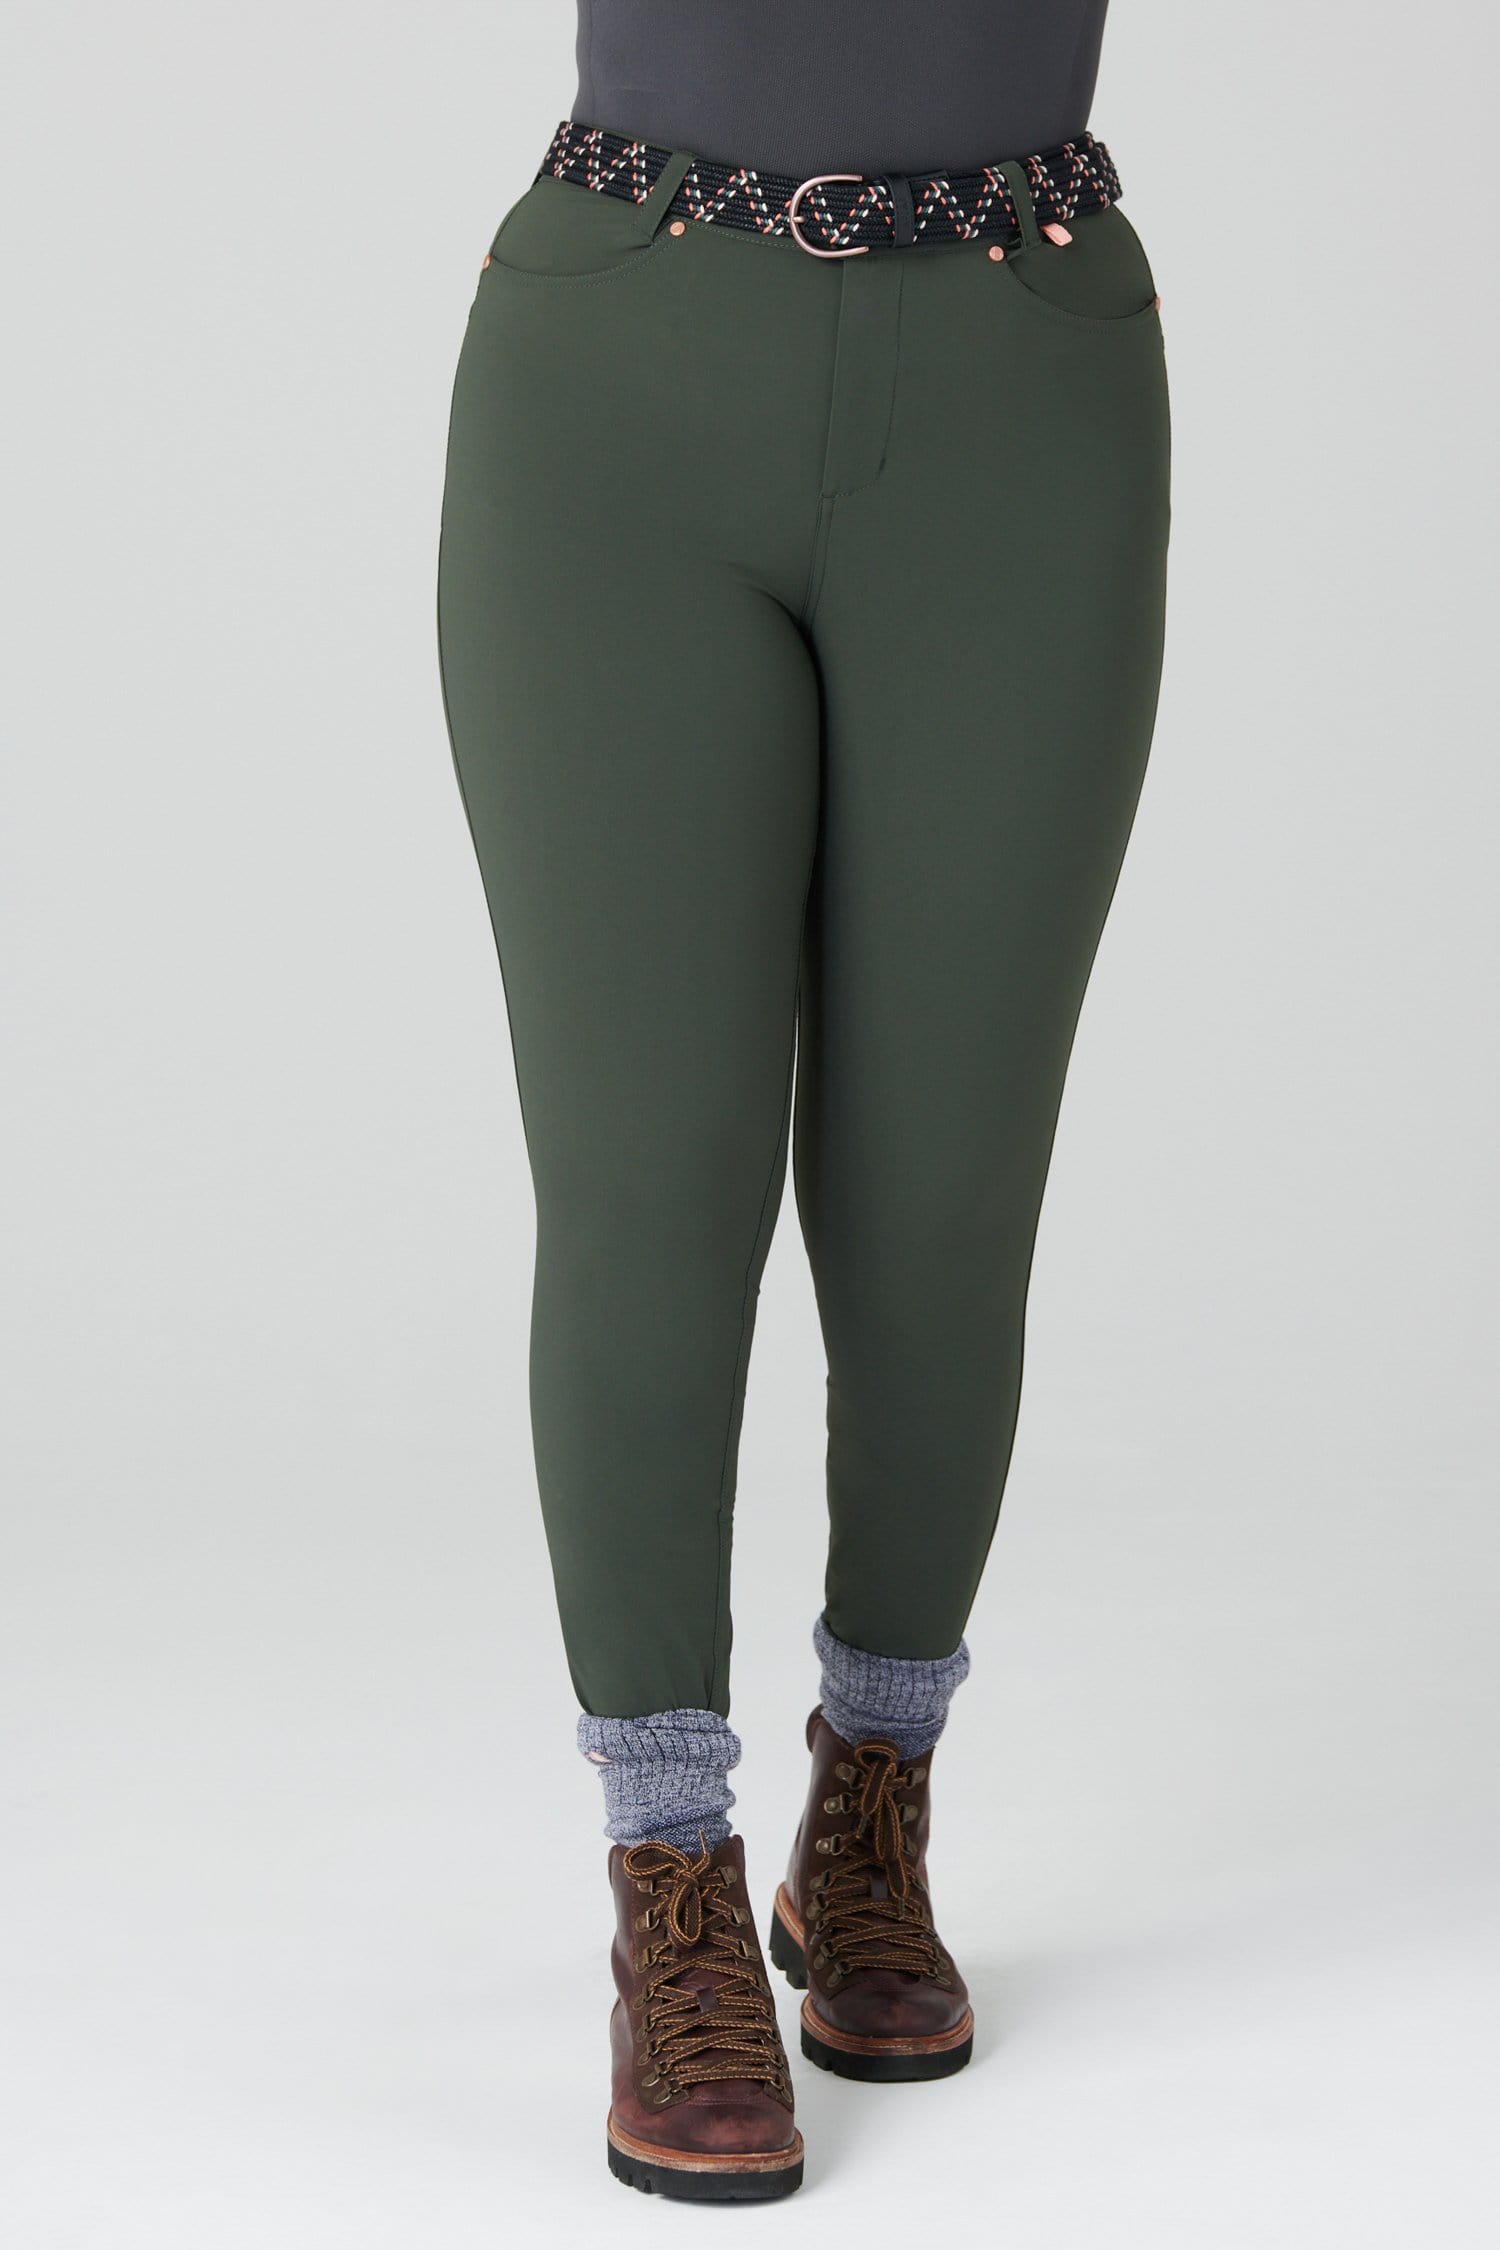 MAX Stretch Skinny Outdoor Trousers - Deep Khaki Trousers  